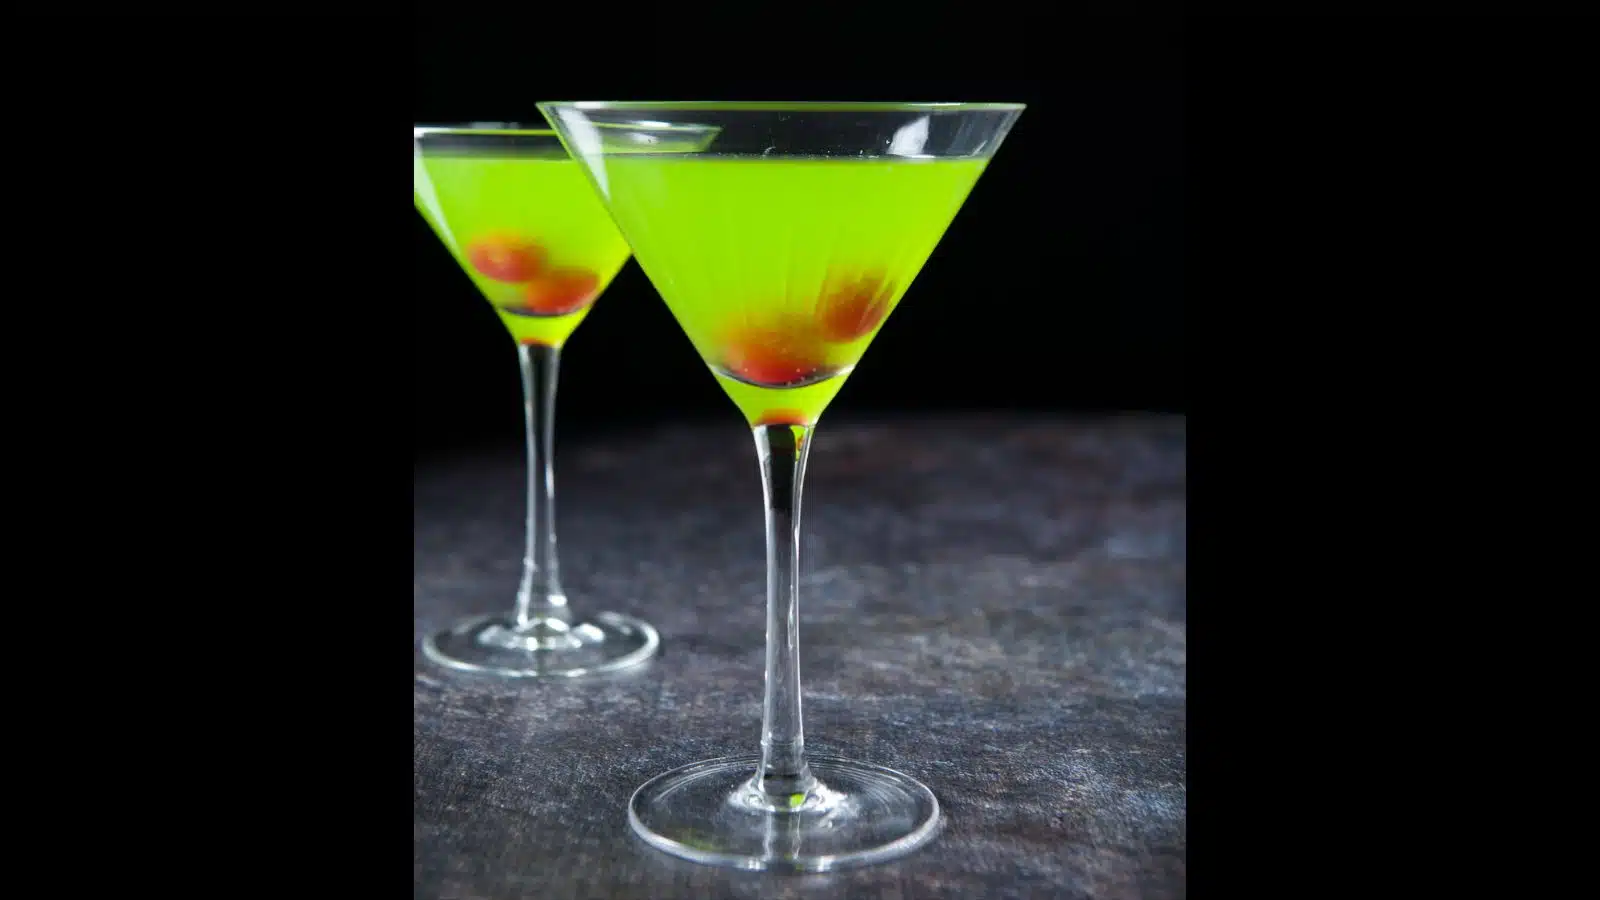 Two martini glasses filled with the bright green cocktail with two cherries in each glass